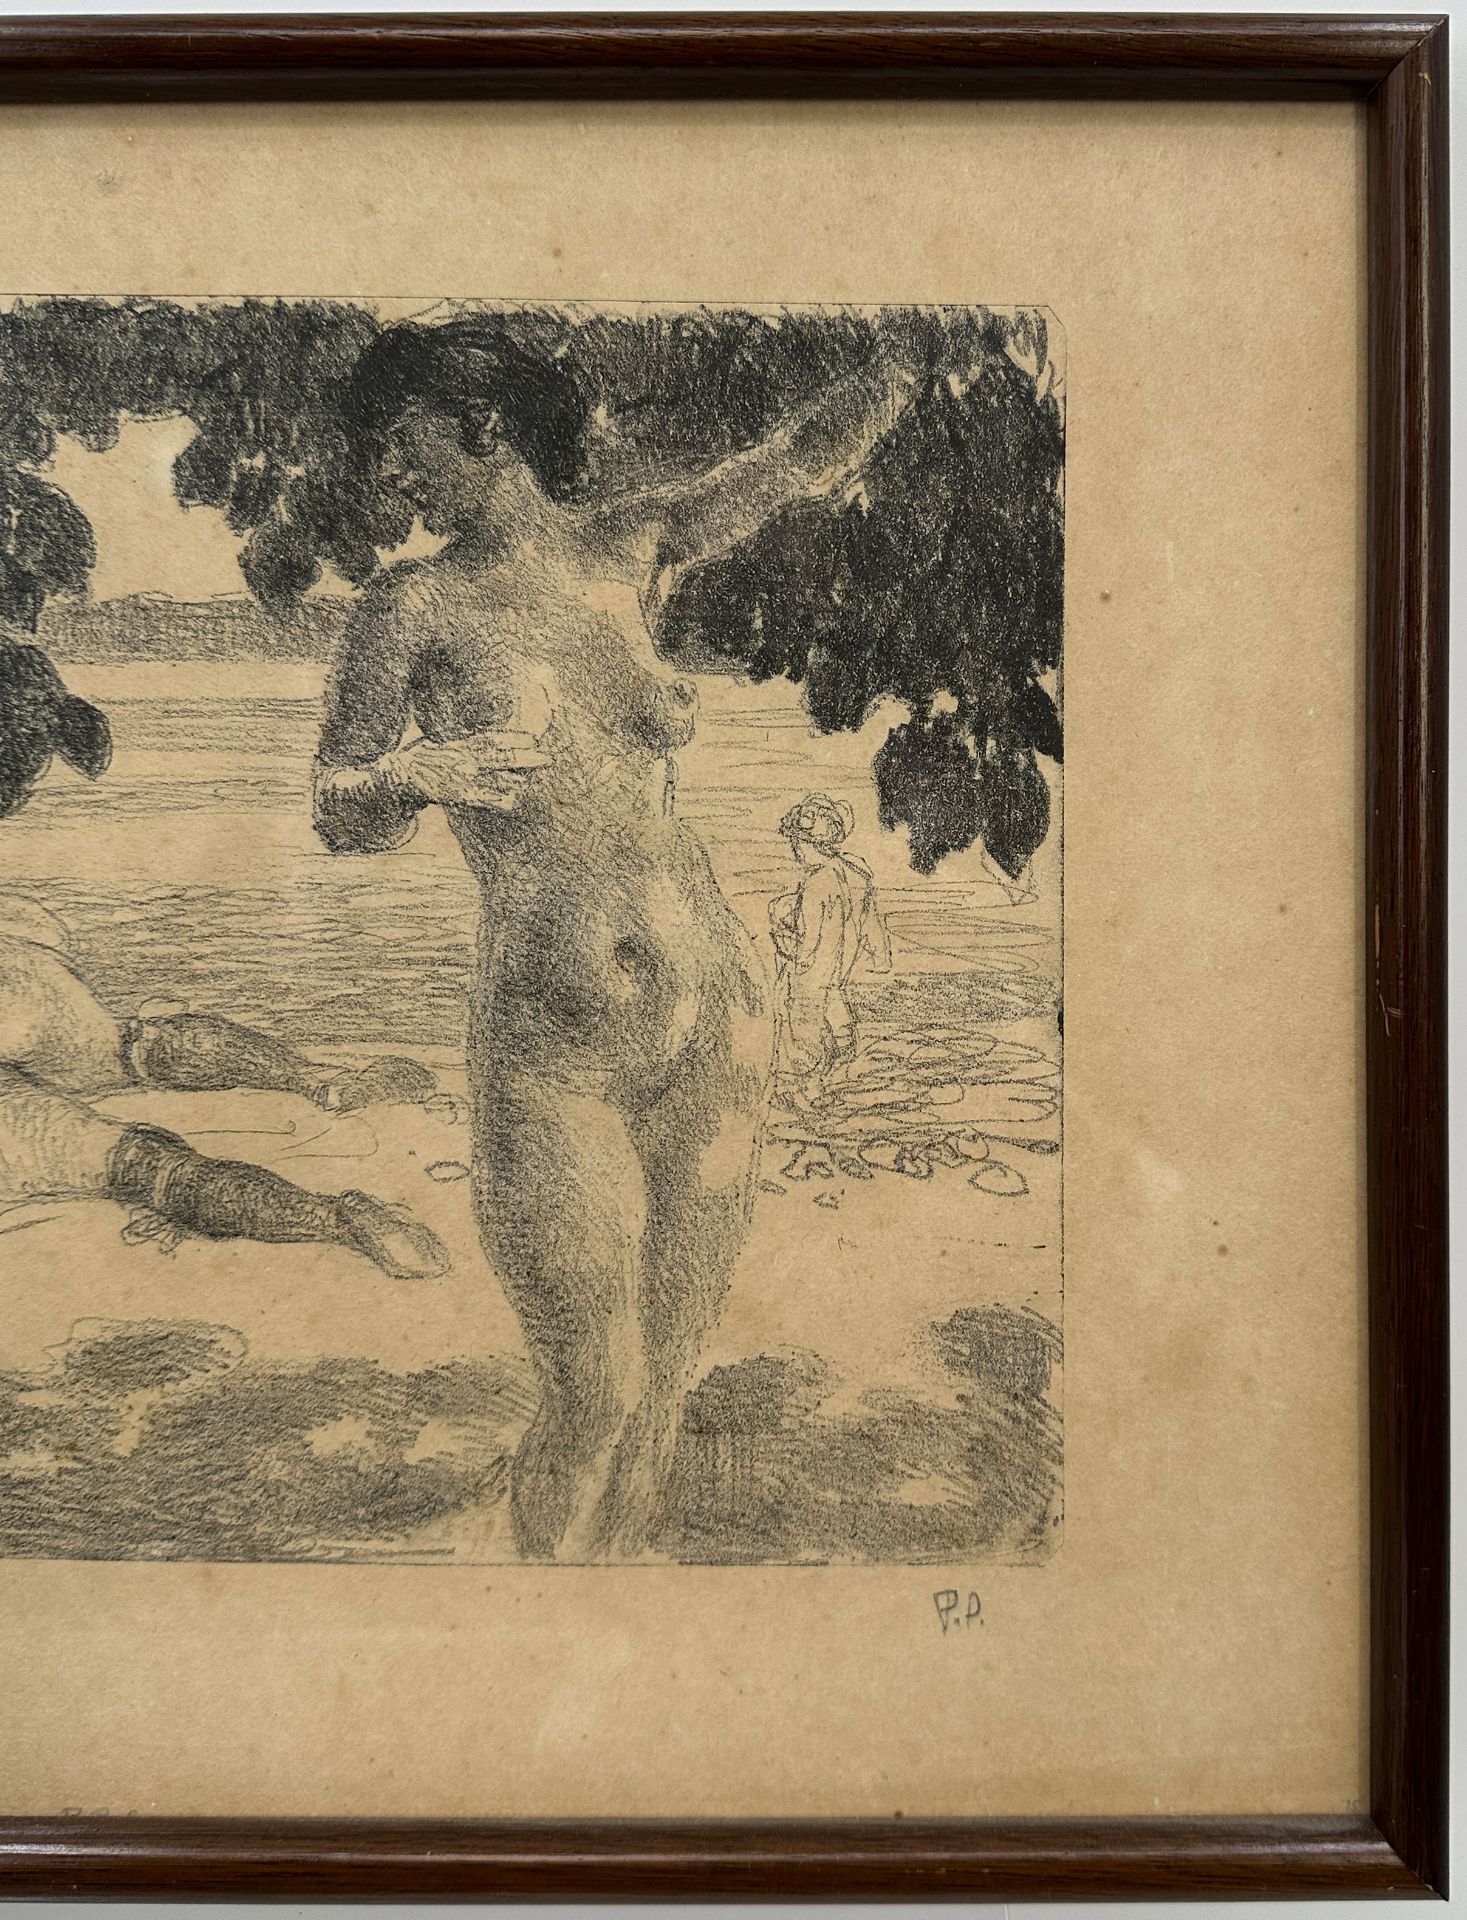 Paul PAEDE (1868 - 1929). Naked woman at the lake. - Image 4 of 11